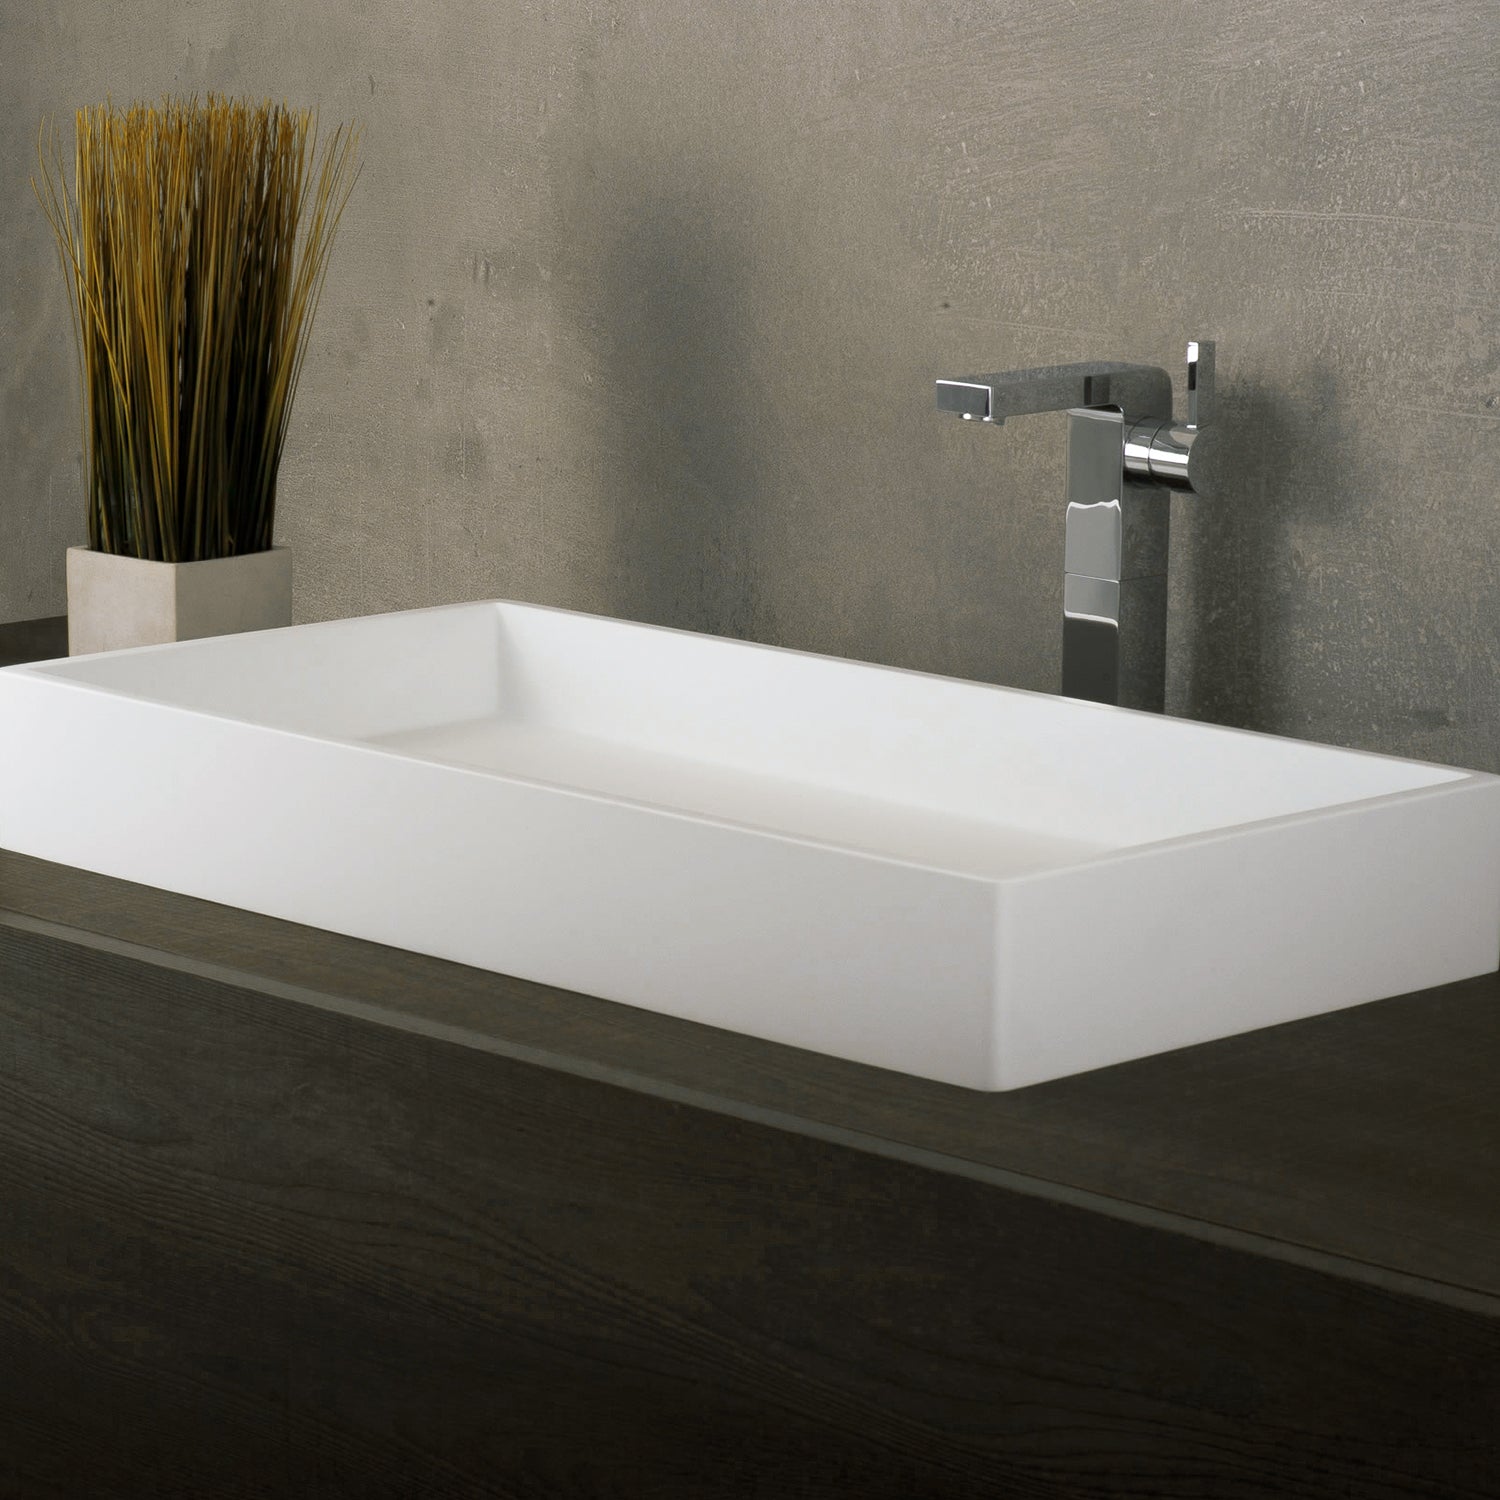 DAX Solid Surface Rectangle Single Bowl Bathroom Vessel Sink, White Matte Finish,  31-1/2 x 15-3/4 x 4-3/4 Inches (DAX-AB-1327)